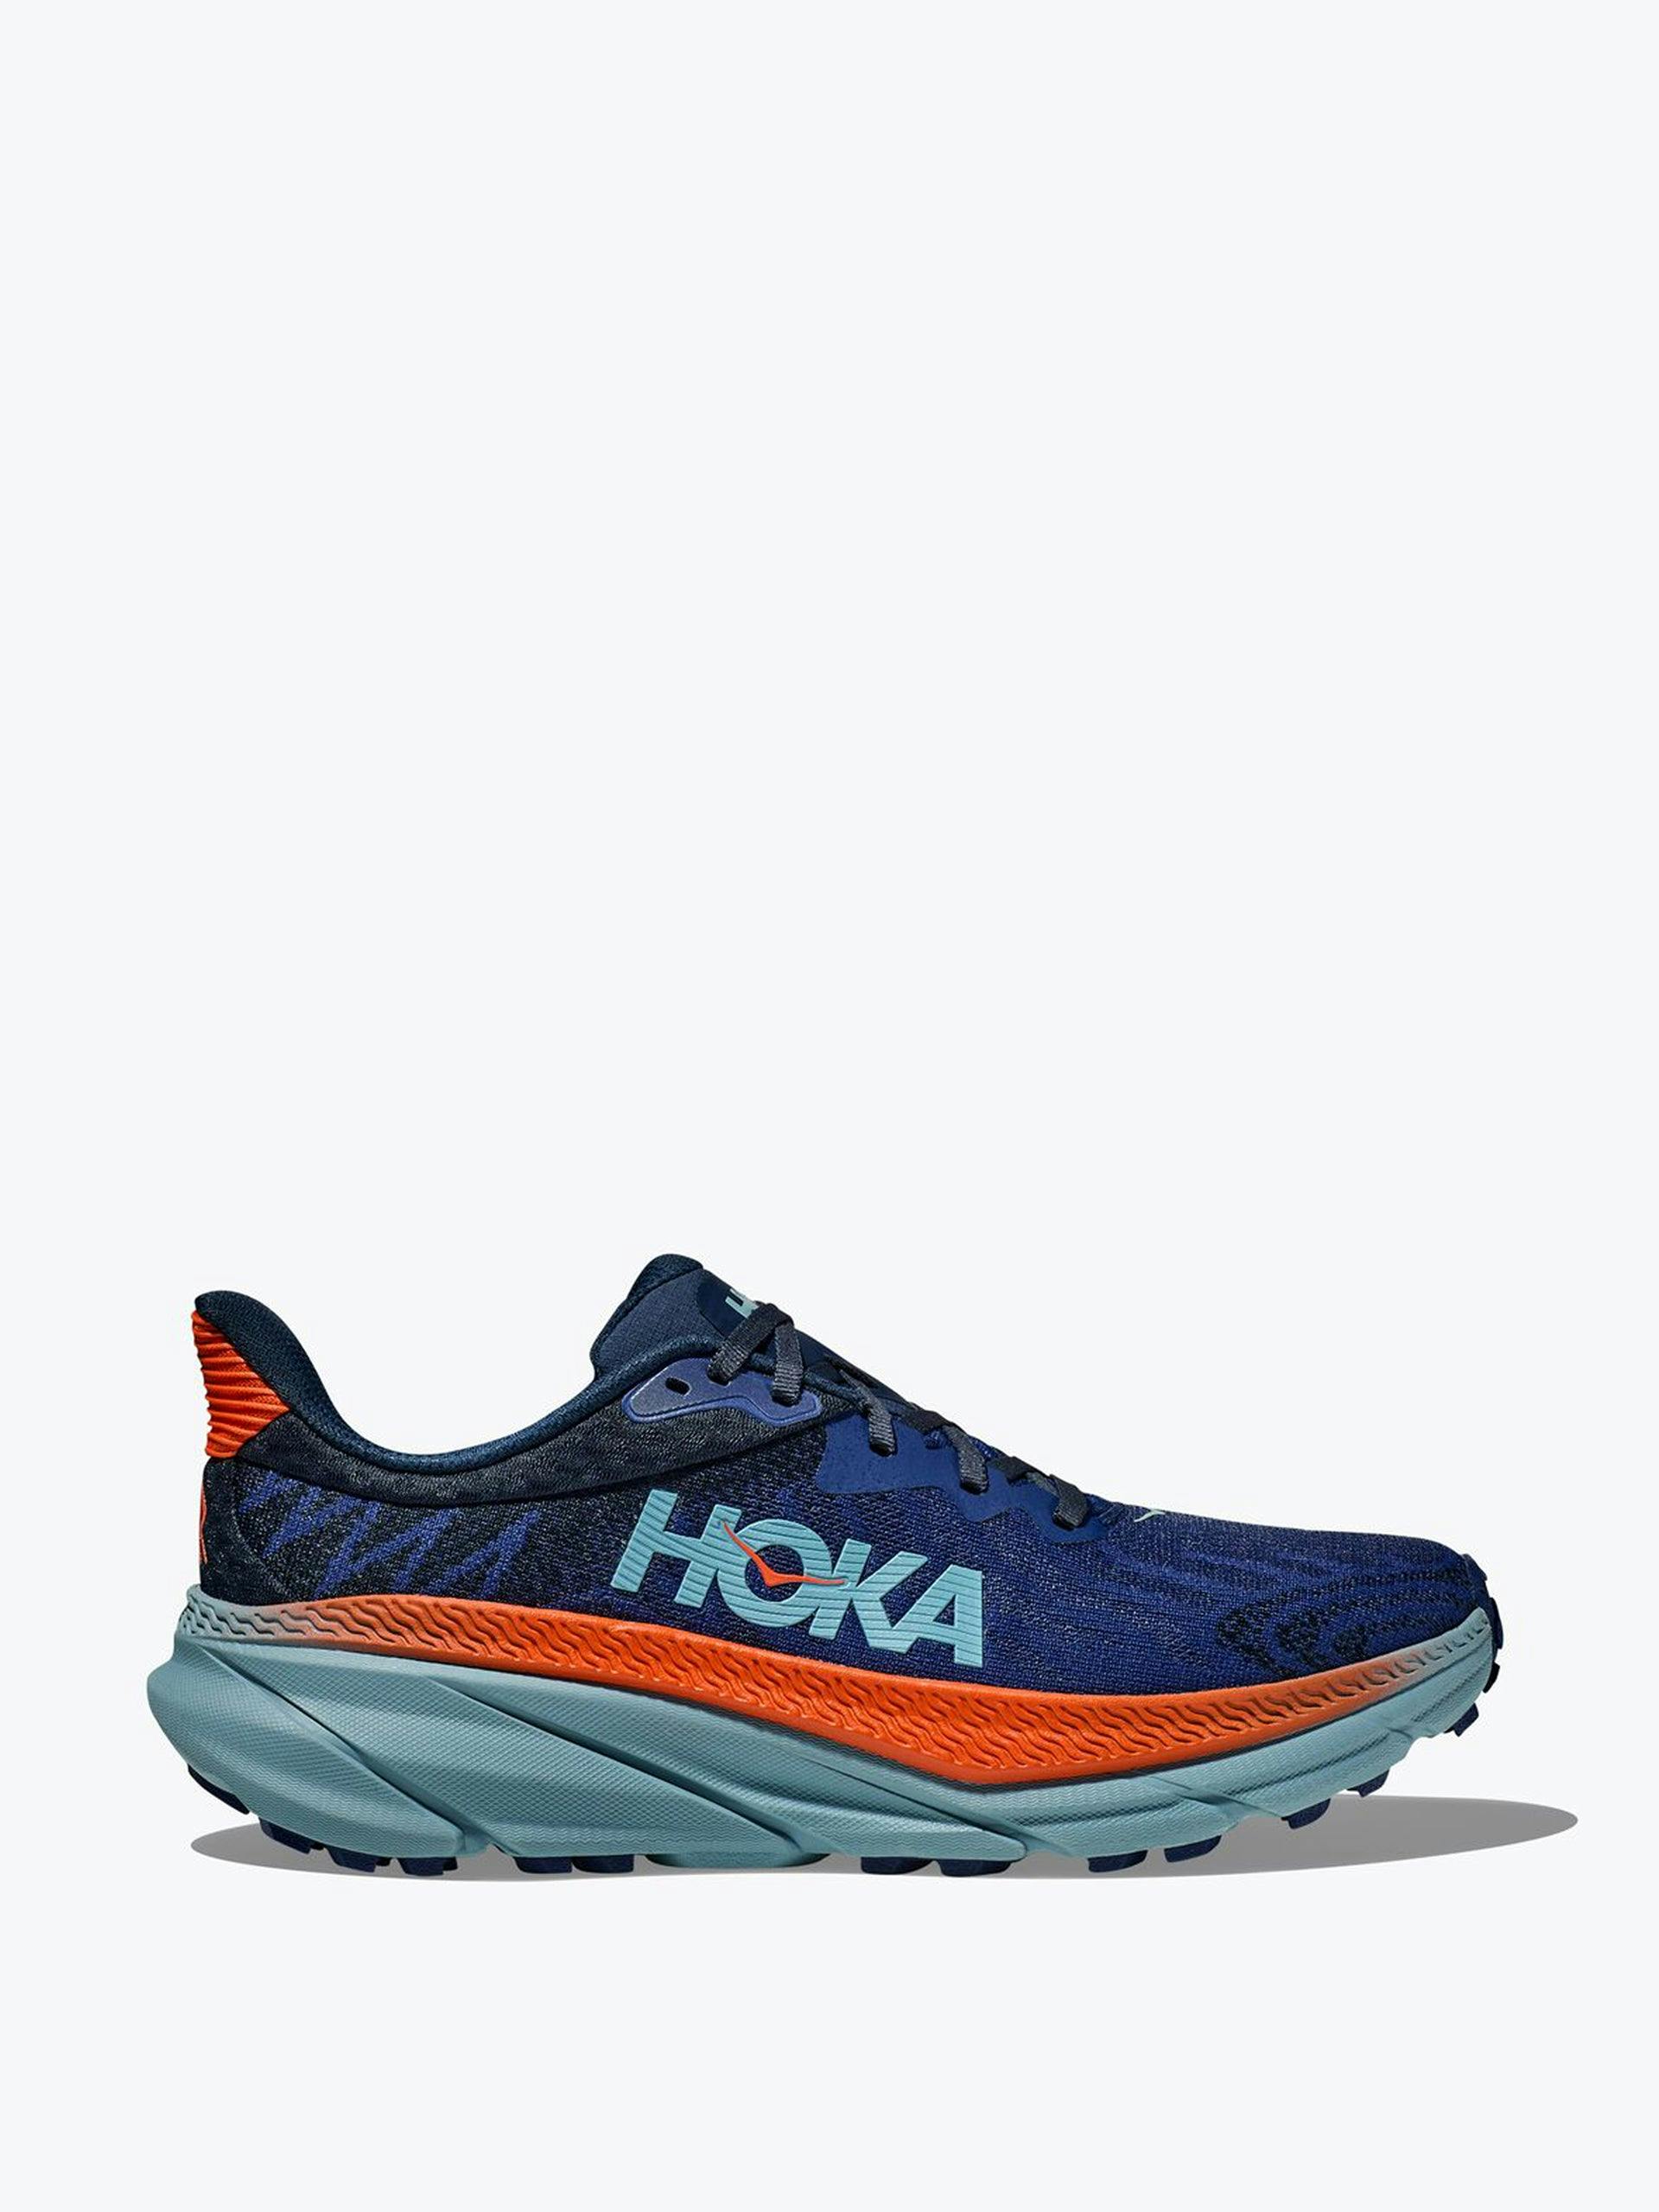 Blue and orange running trainers